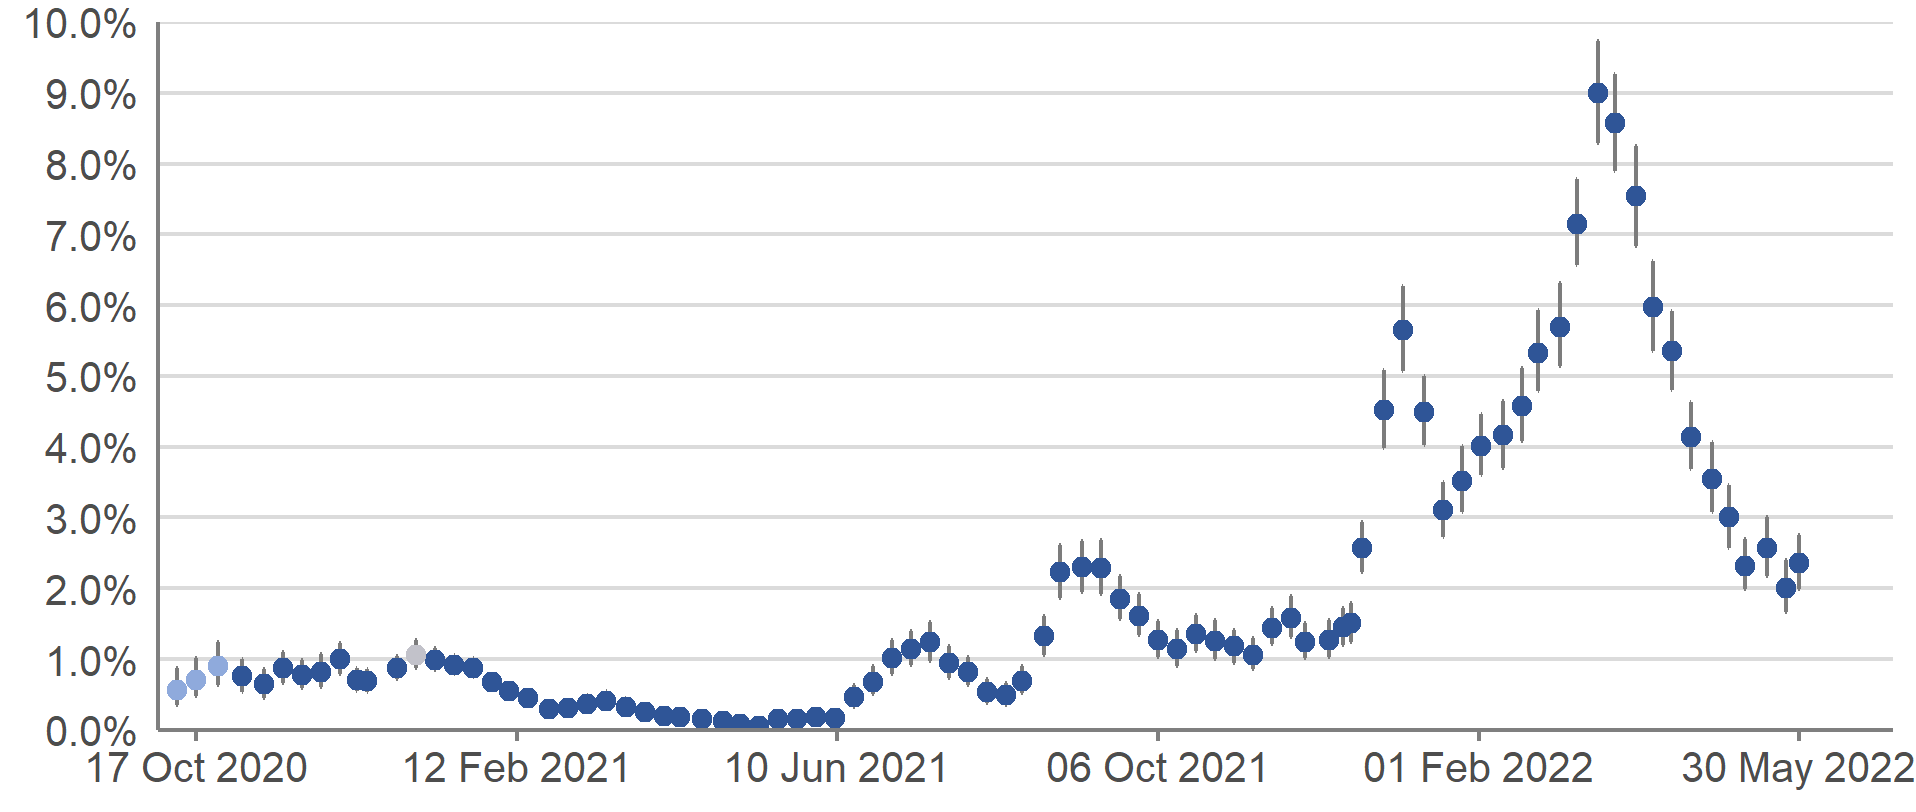 A scatter chart showing official weekly reported estimates of the percentage of the population in Scotland testing positive for COVID-19 between 3 October 2020 and 2 June 2022. Pale blue circles denote 14-day weighted estimates, dark blue circles denote official reported weekly estimates and whiskers show the 95% credible intervals. The estimates peaked in mid-March 2022 before decreasing for several weeks. In the most recent week, the trend in the estimated percentage of people testing positive for COVID-19 is uncertain.